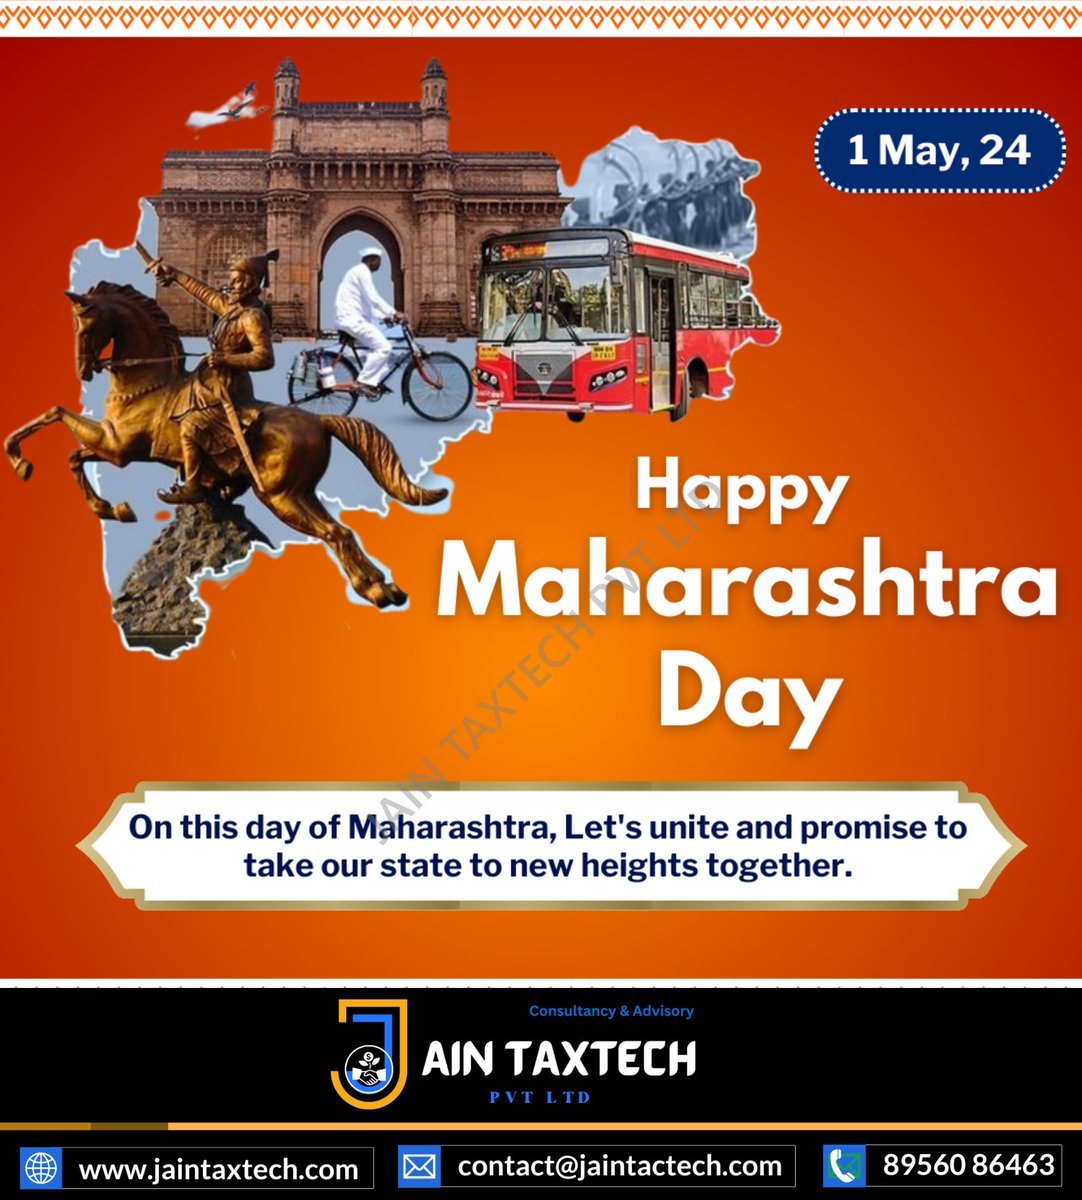 Happy Maharashtra Day! 🎉 Celebrating the Rich Heritage, Culture, and Progress of Maharashtra. Jain TaxTech Extends Best Wishes to the People of Maharashtra! 🌟🏞️ #MaharashtraDay #Celebrations #JainTaxTech #AccountingServices #FinancialConsulting #CAConsultancy